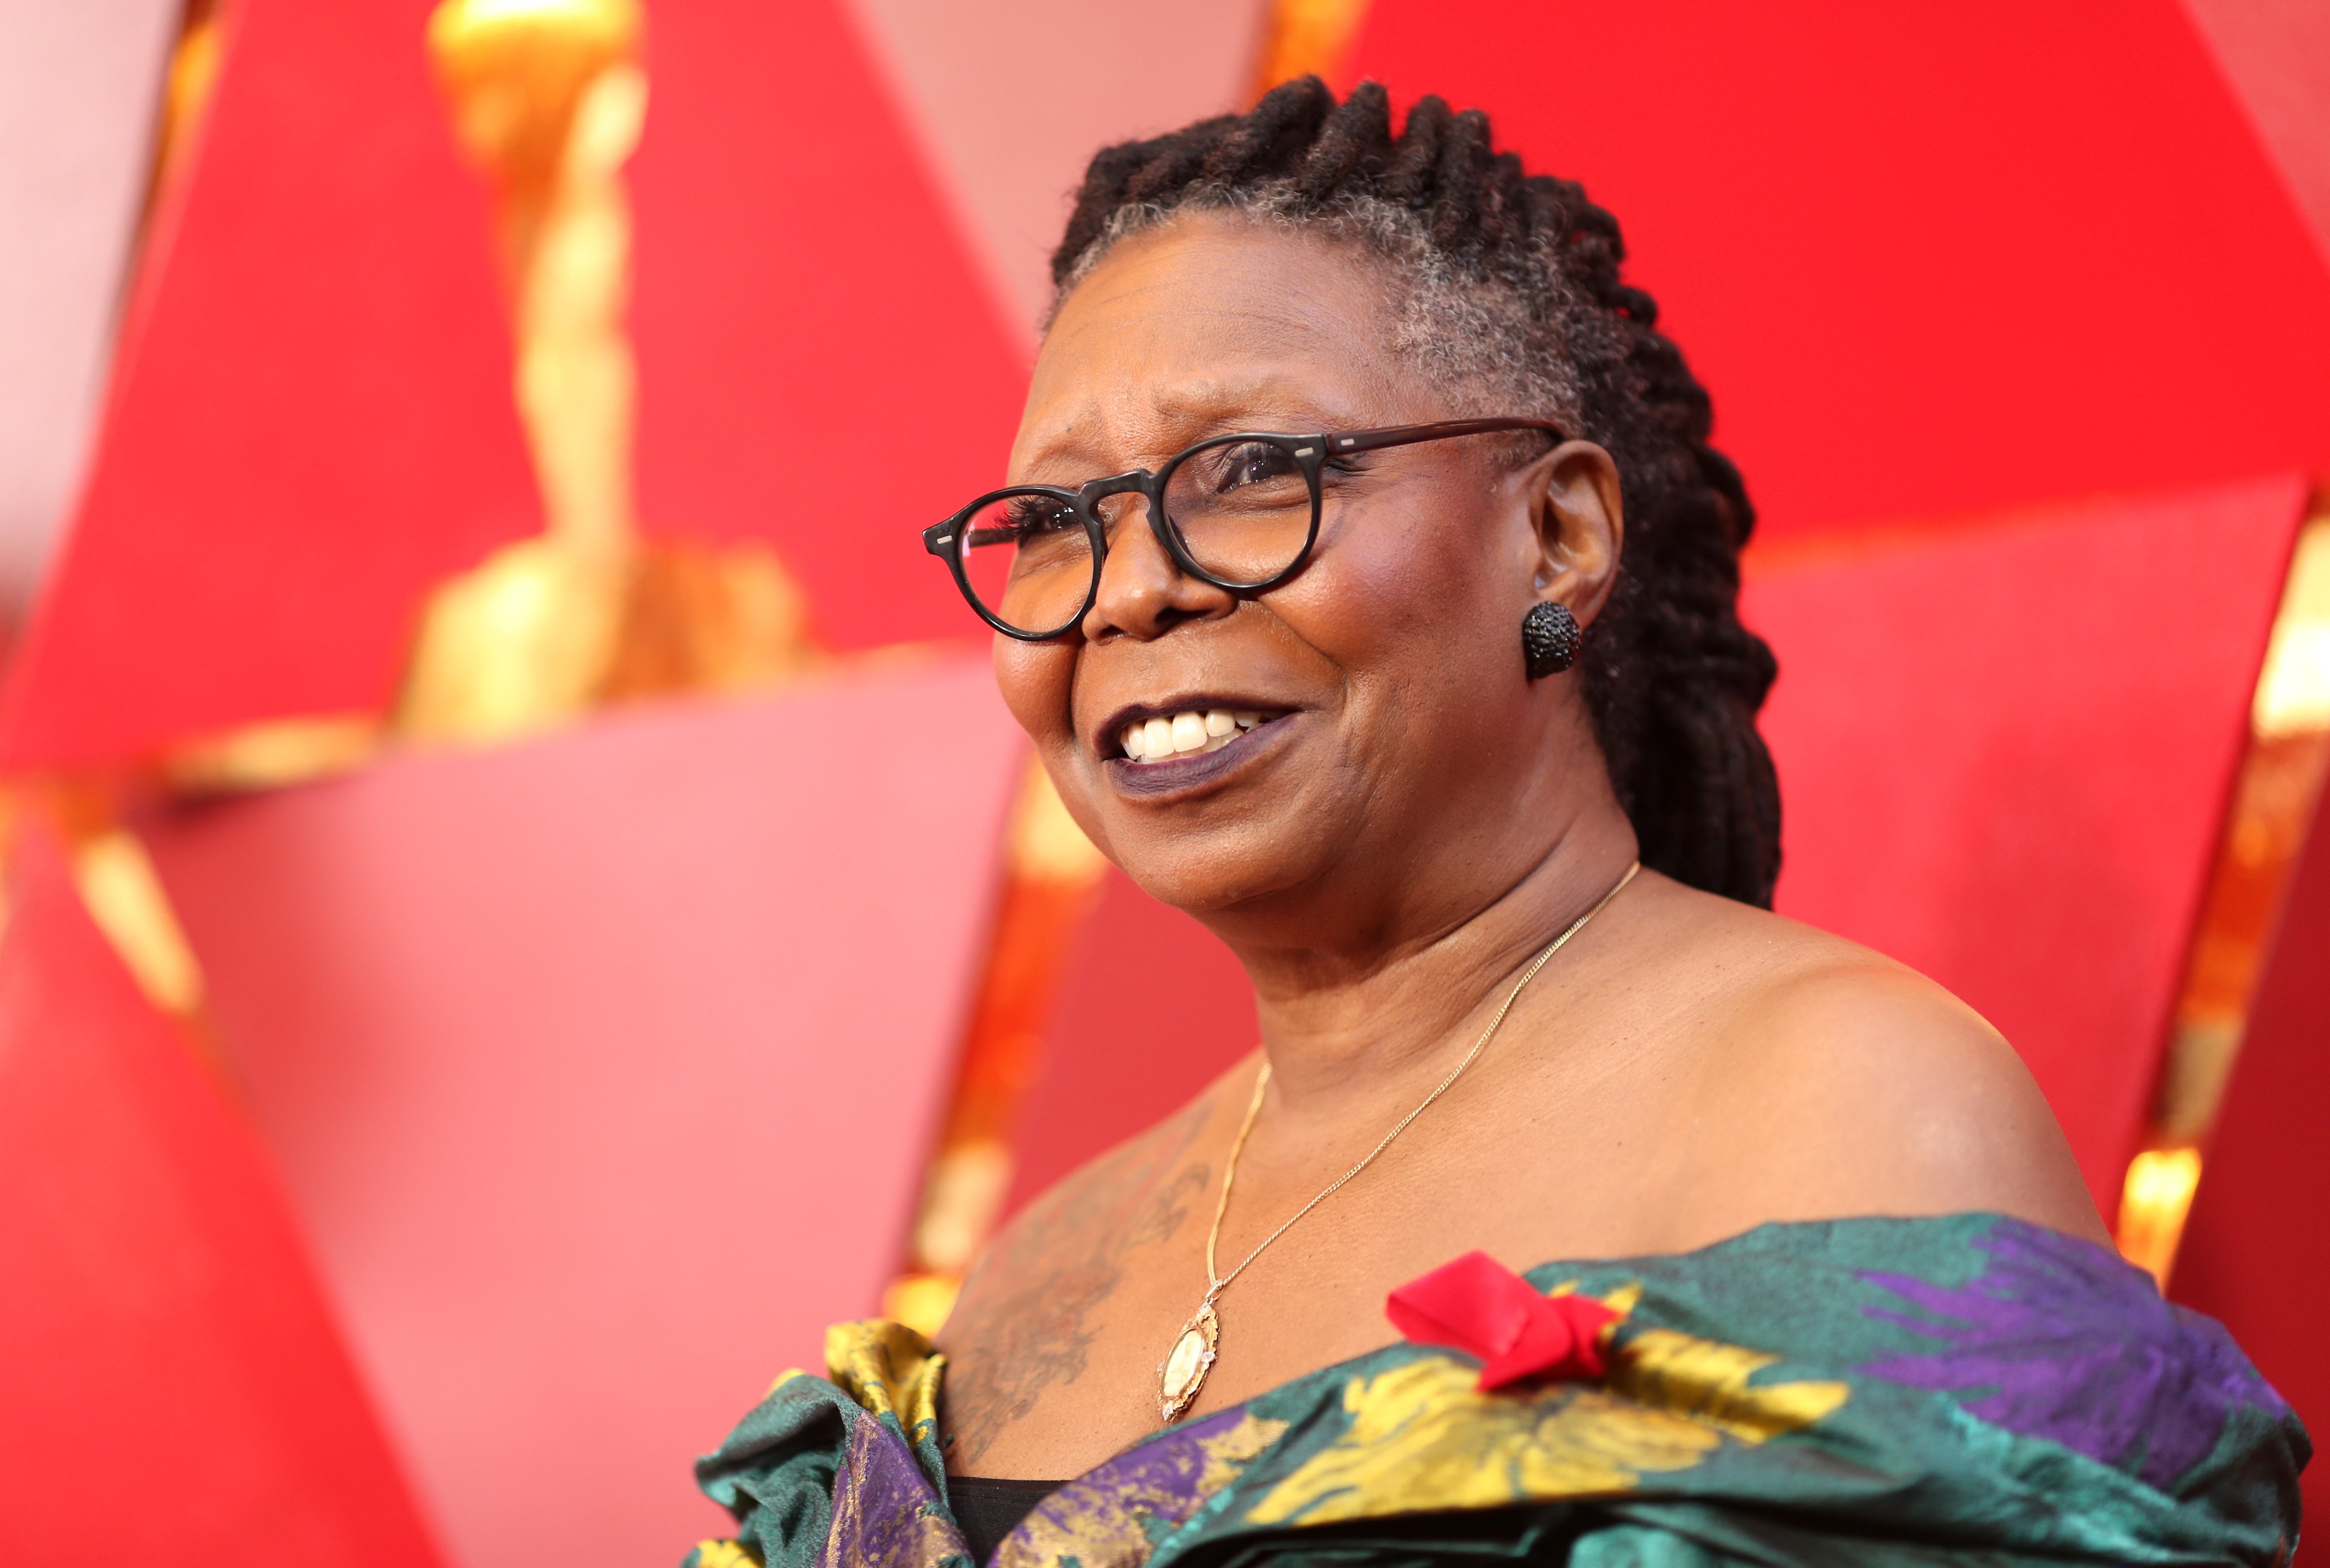 Whoopi Goldberg attends the 90th Annual Academy Awards at Hollywood & Highland Center in Hollywood, California | Photo: Getty Images